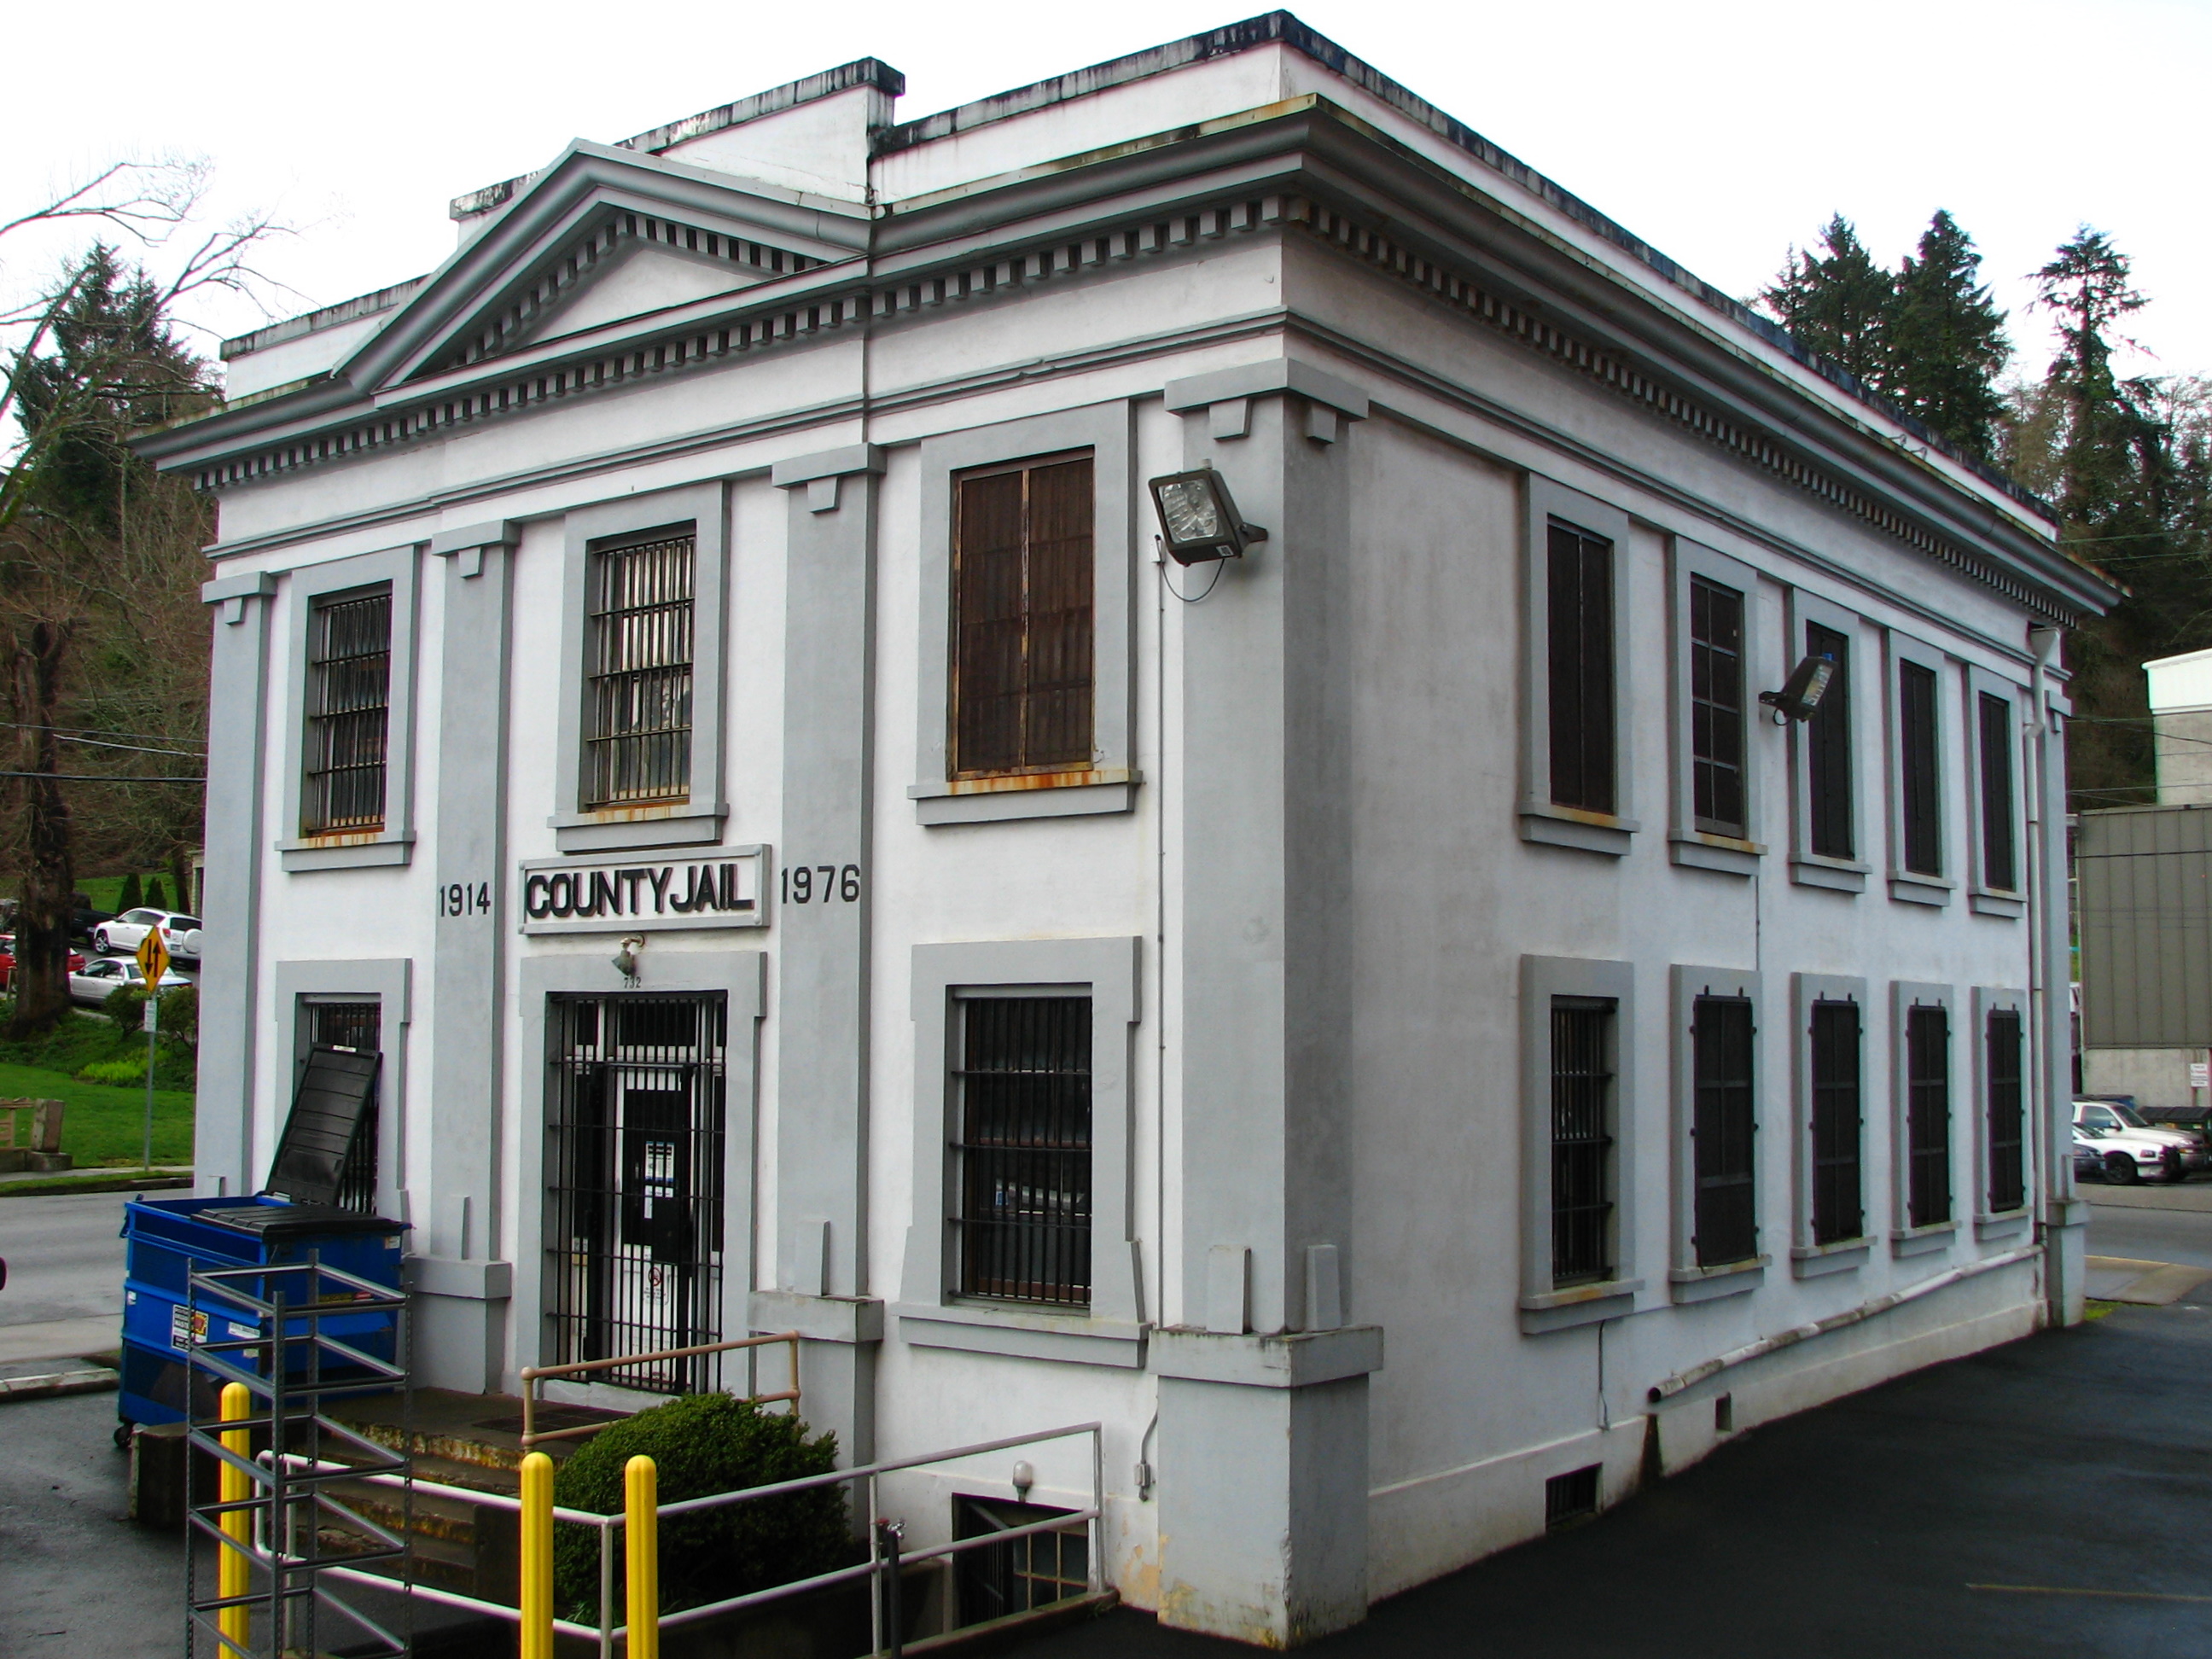 Clatsop County Jail - best things to do on oregon coast during spring break